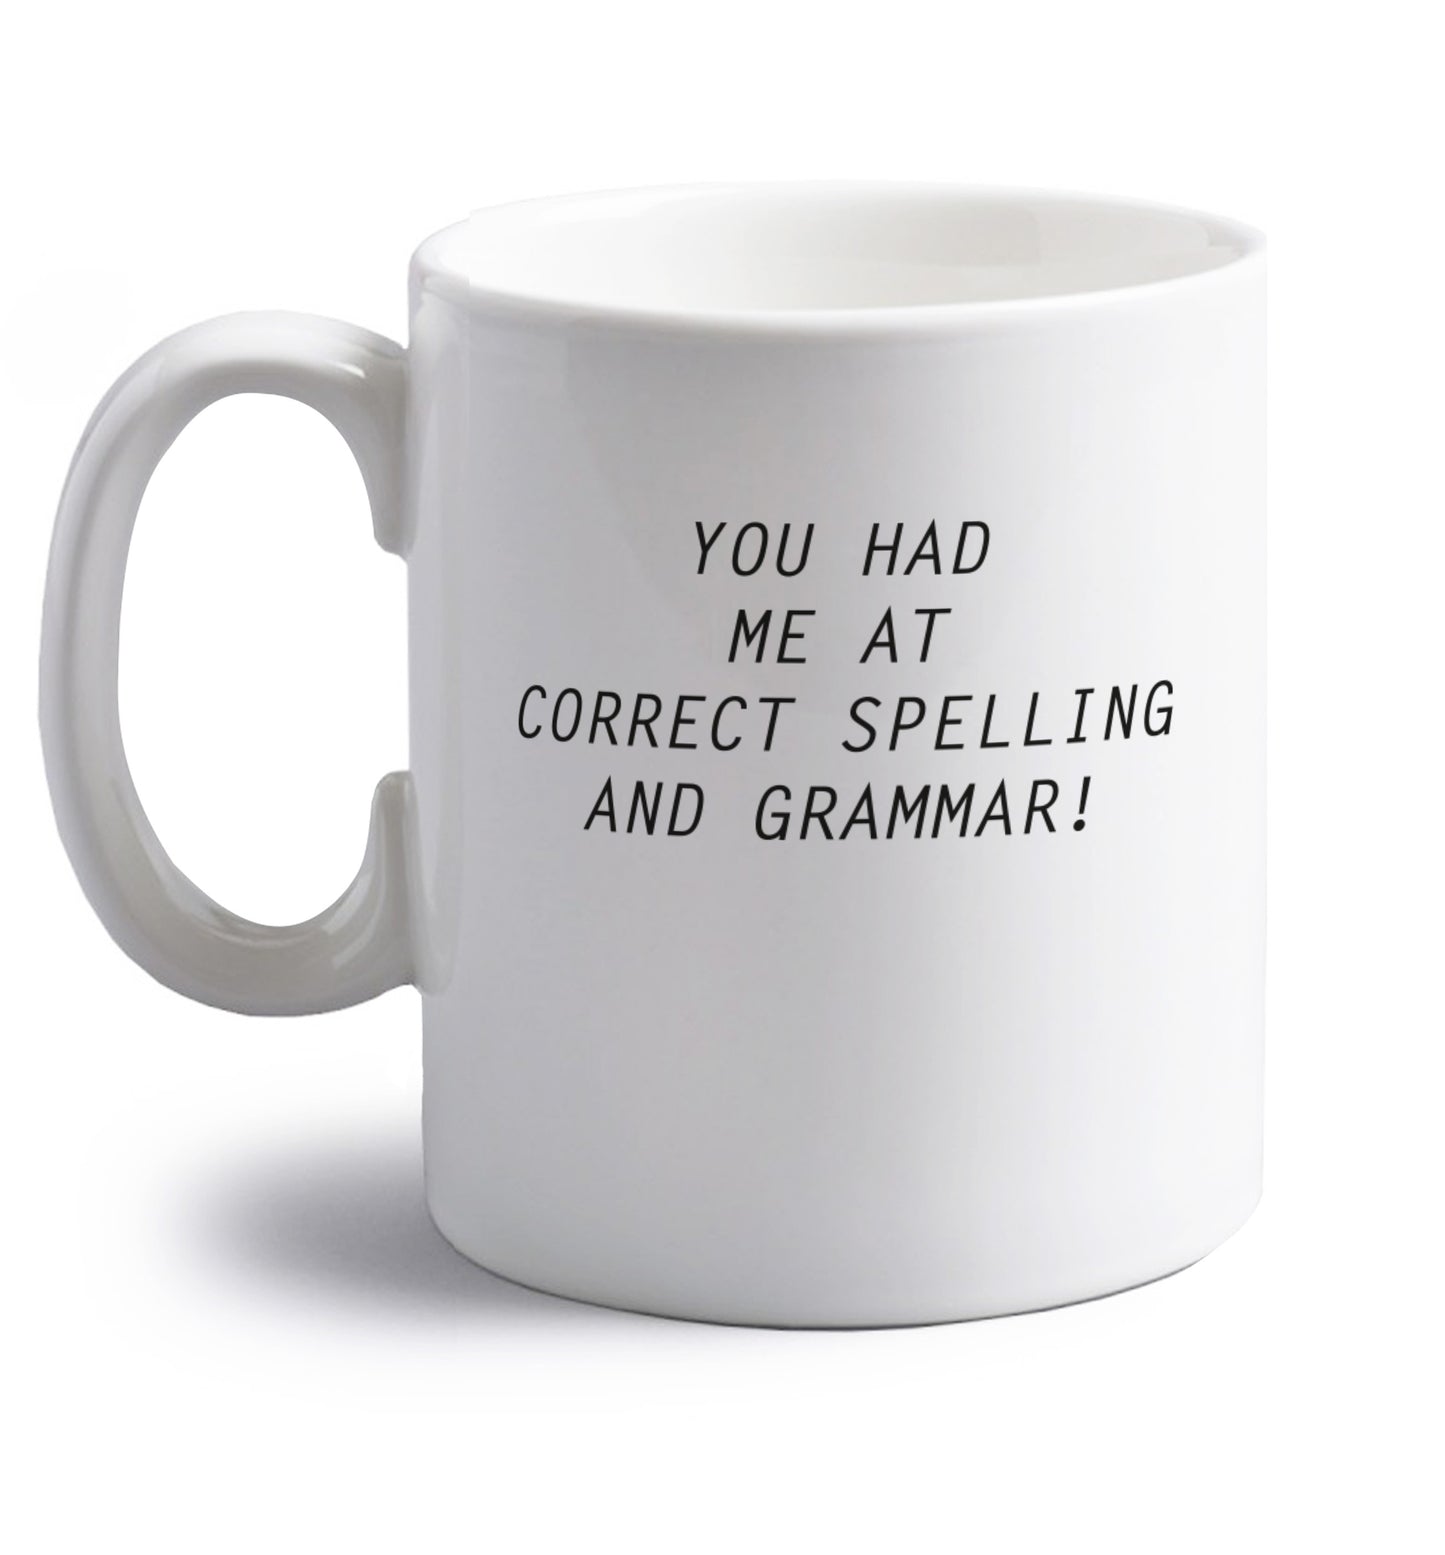 You had me at correct spelling and grammar right handed white ceramic mug 